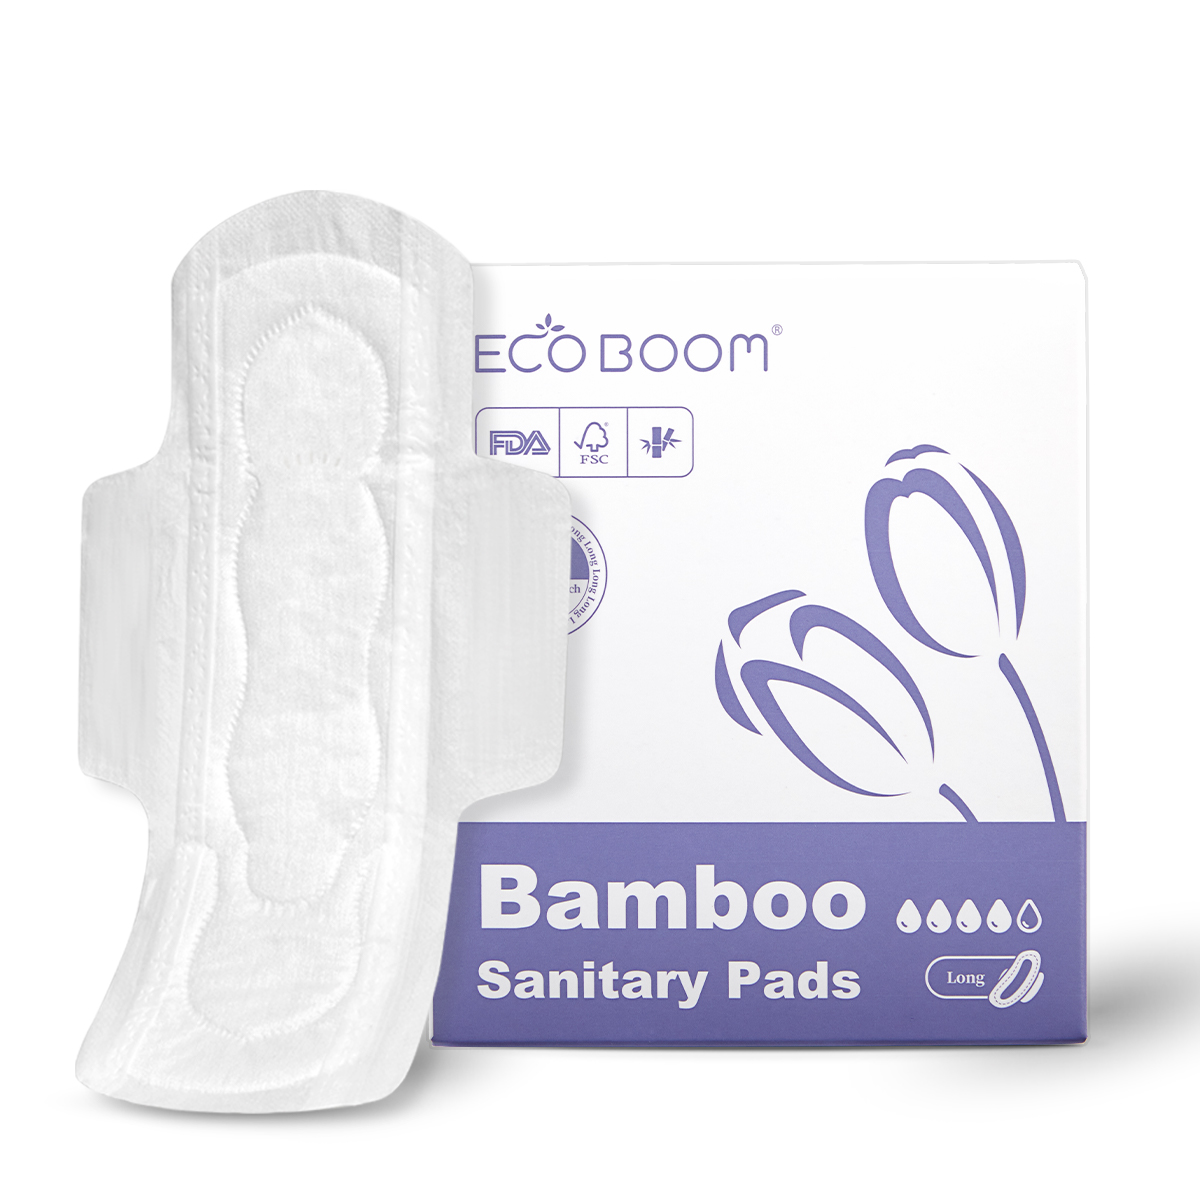 Join Ecoboom bamboo fibre sanitary pads factory-1